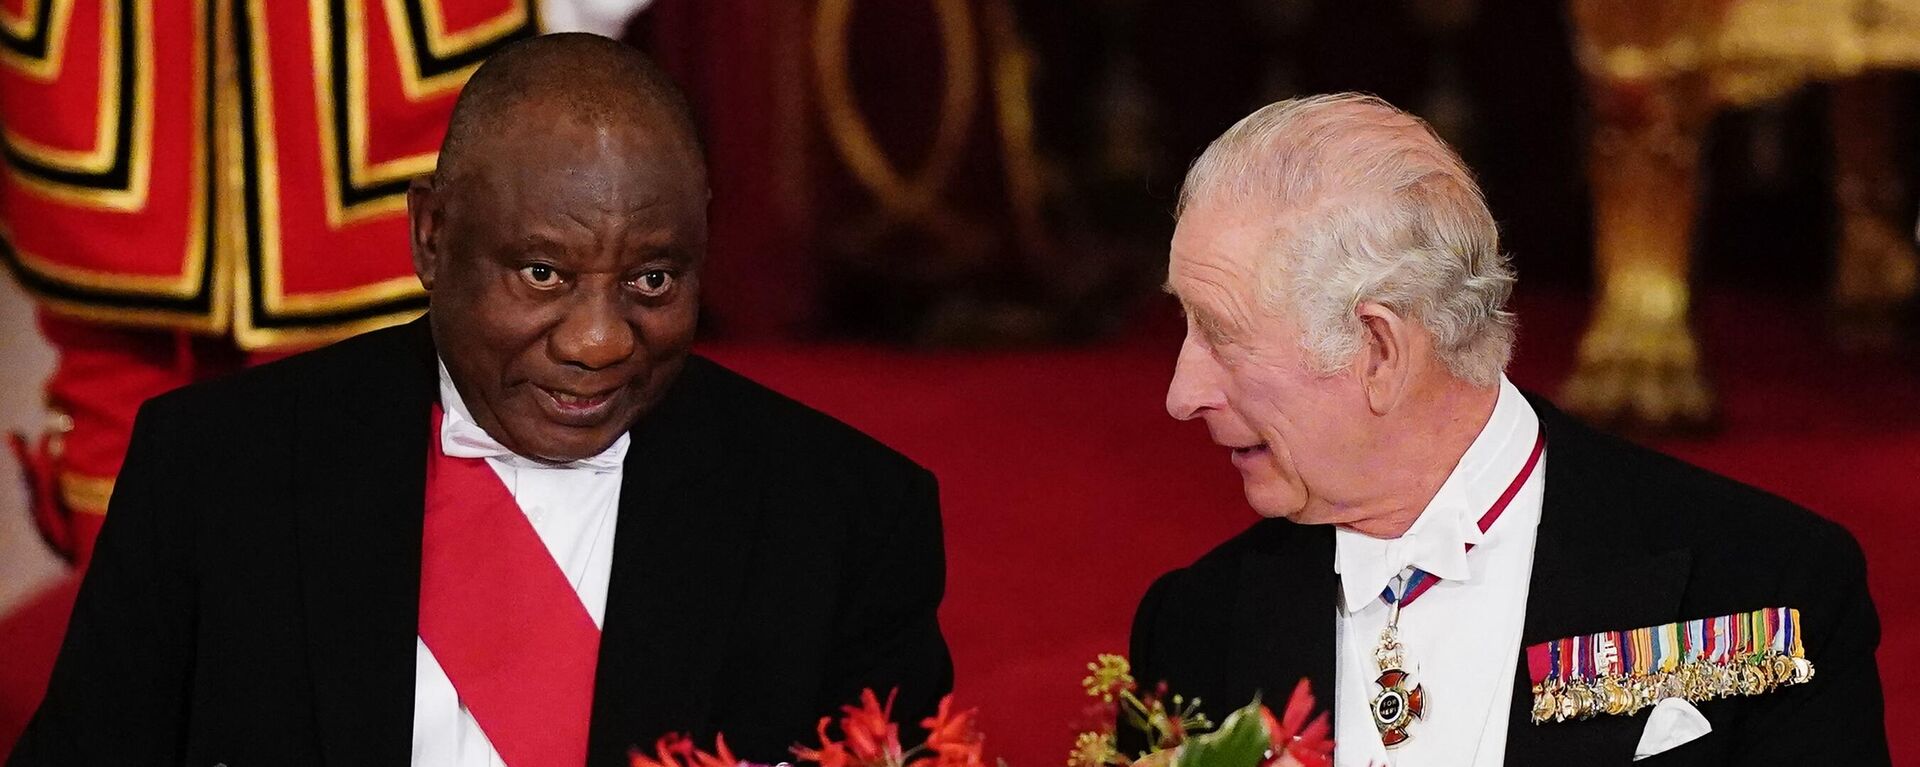 South Africa's President Cyril Ramaphosa (L) talks with Britain's King Charles III during a State Banquet at Buckingham Palace in London on November 22, 2022, at the start of the president's two-day state visit. - Sputnik International, 1920, 23.11.2022